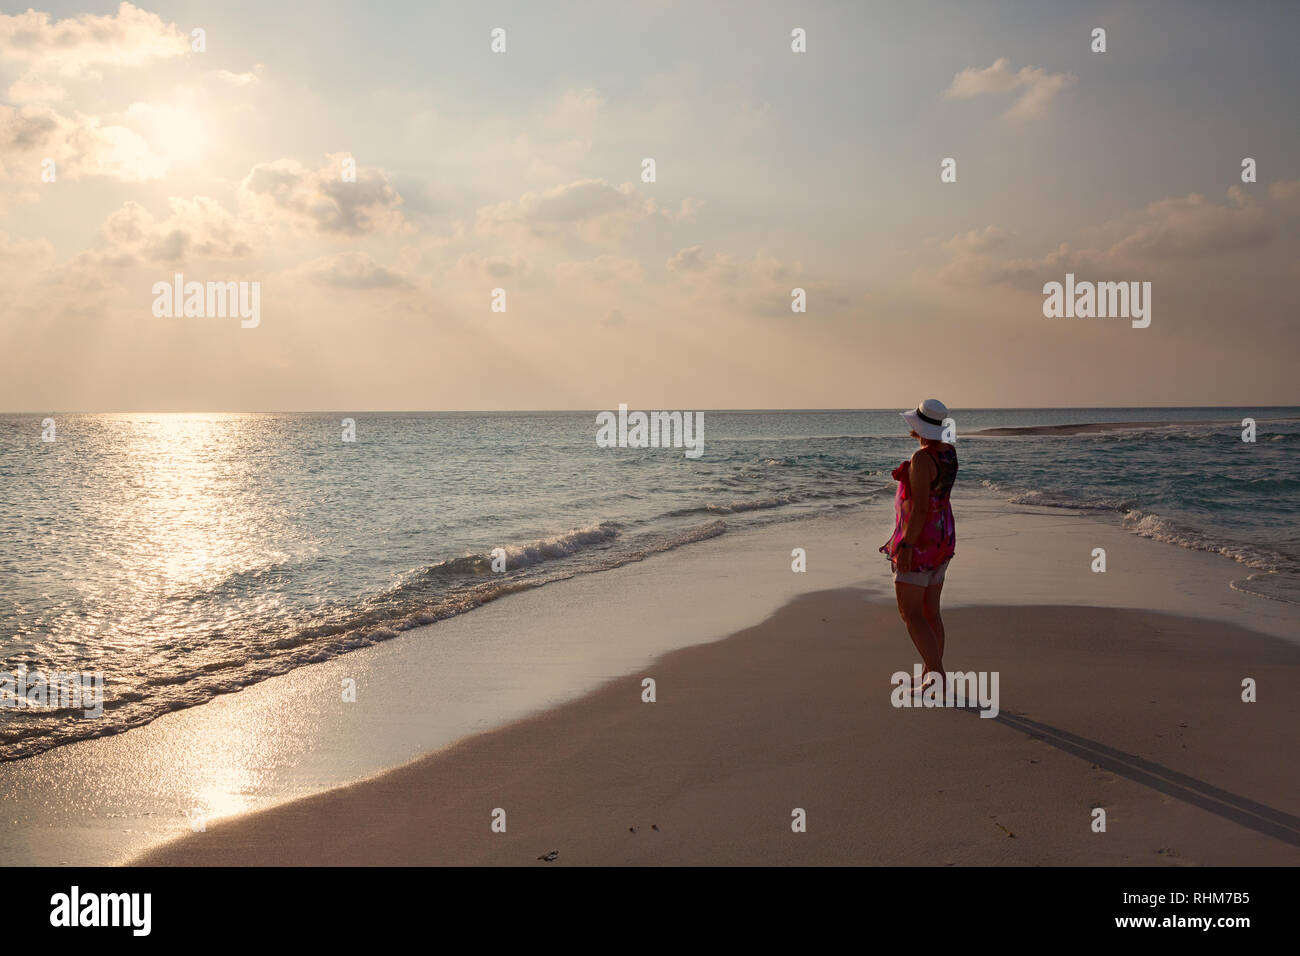 Maldives holiday - a woman tourist watching the sunset over the Indian Ocean from the beach, Concept - travel; Rasdhoo atoll, the Maldives Asia Stock Photo